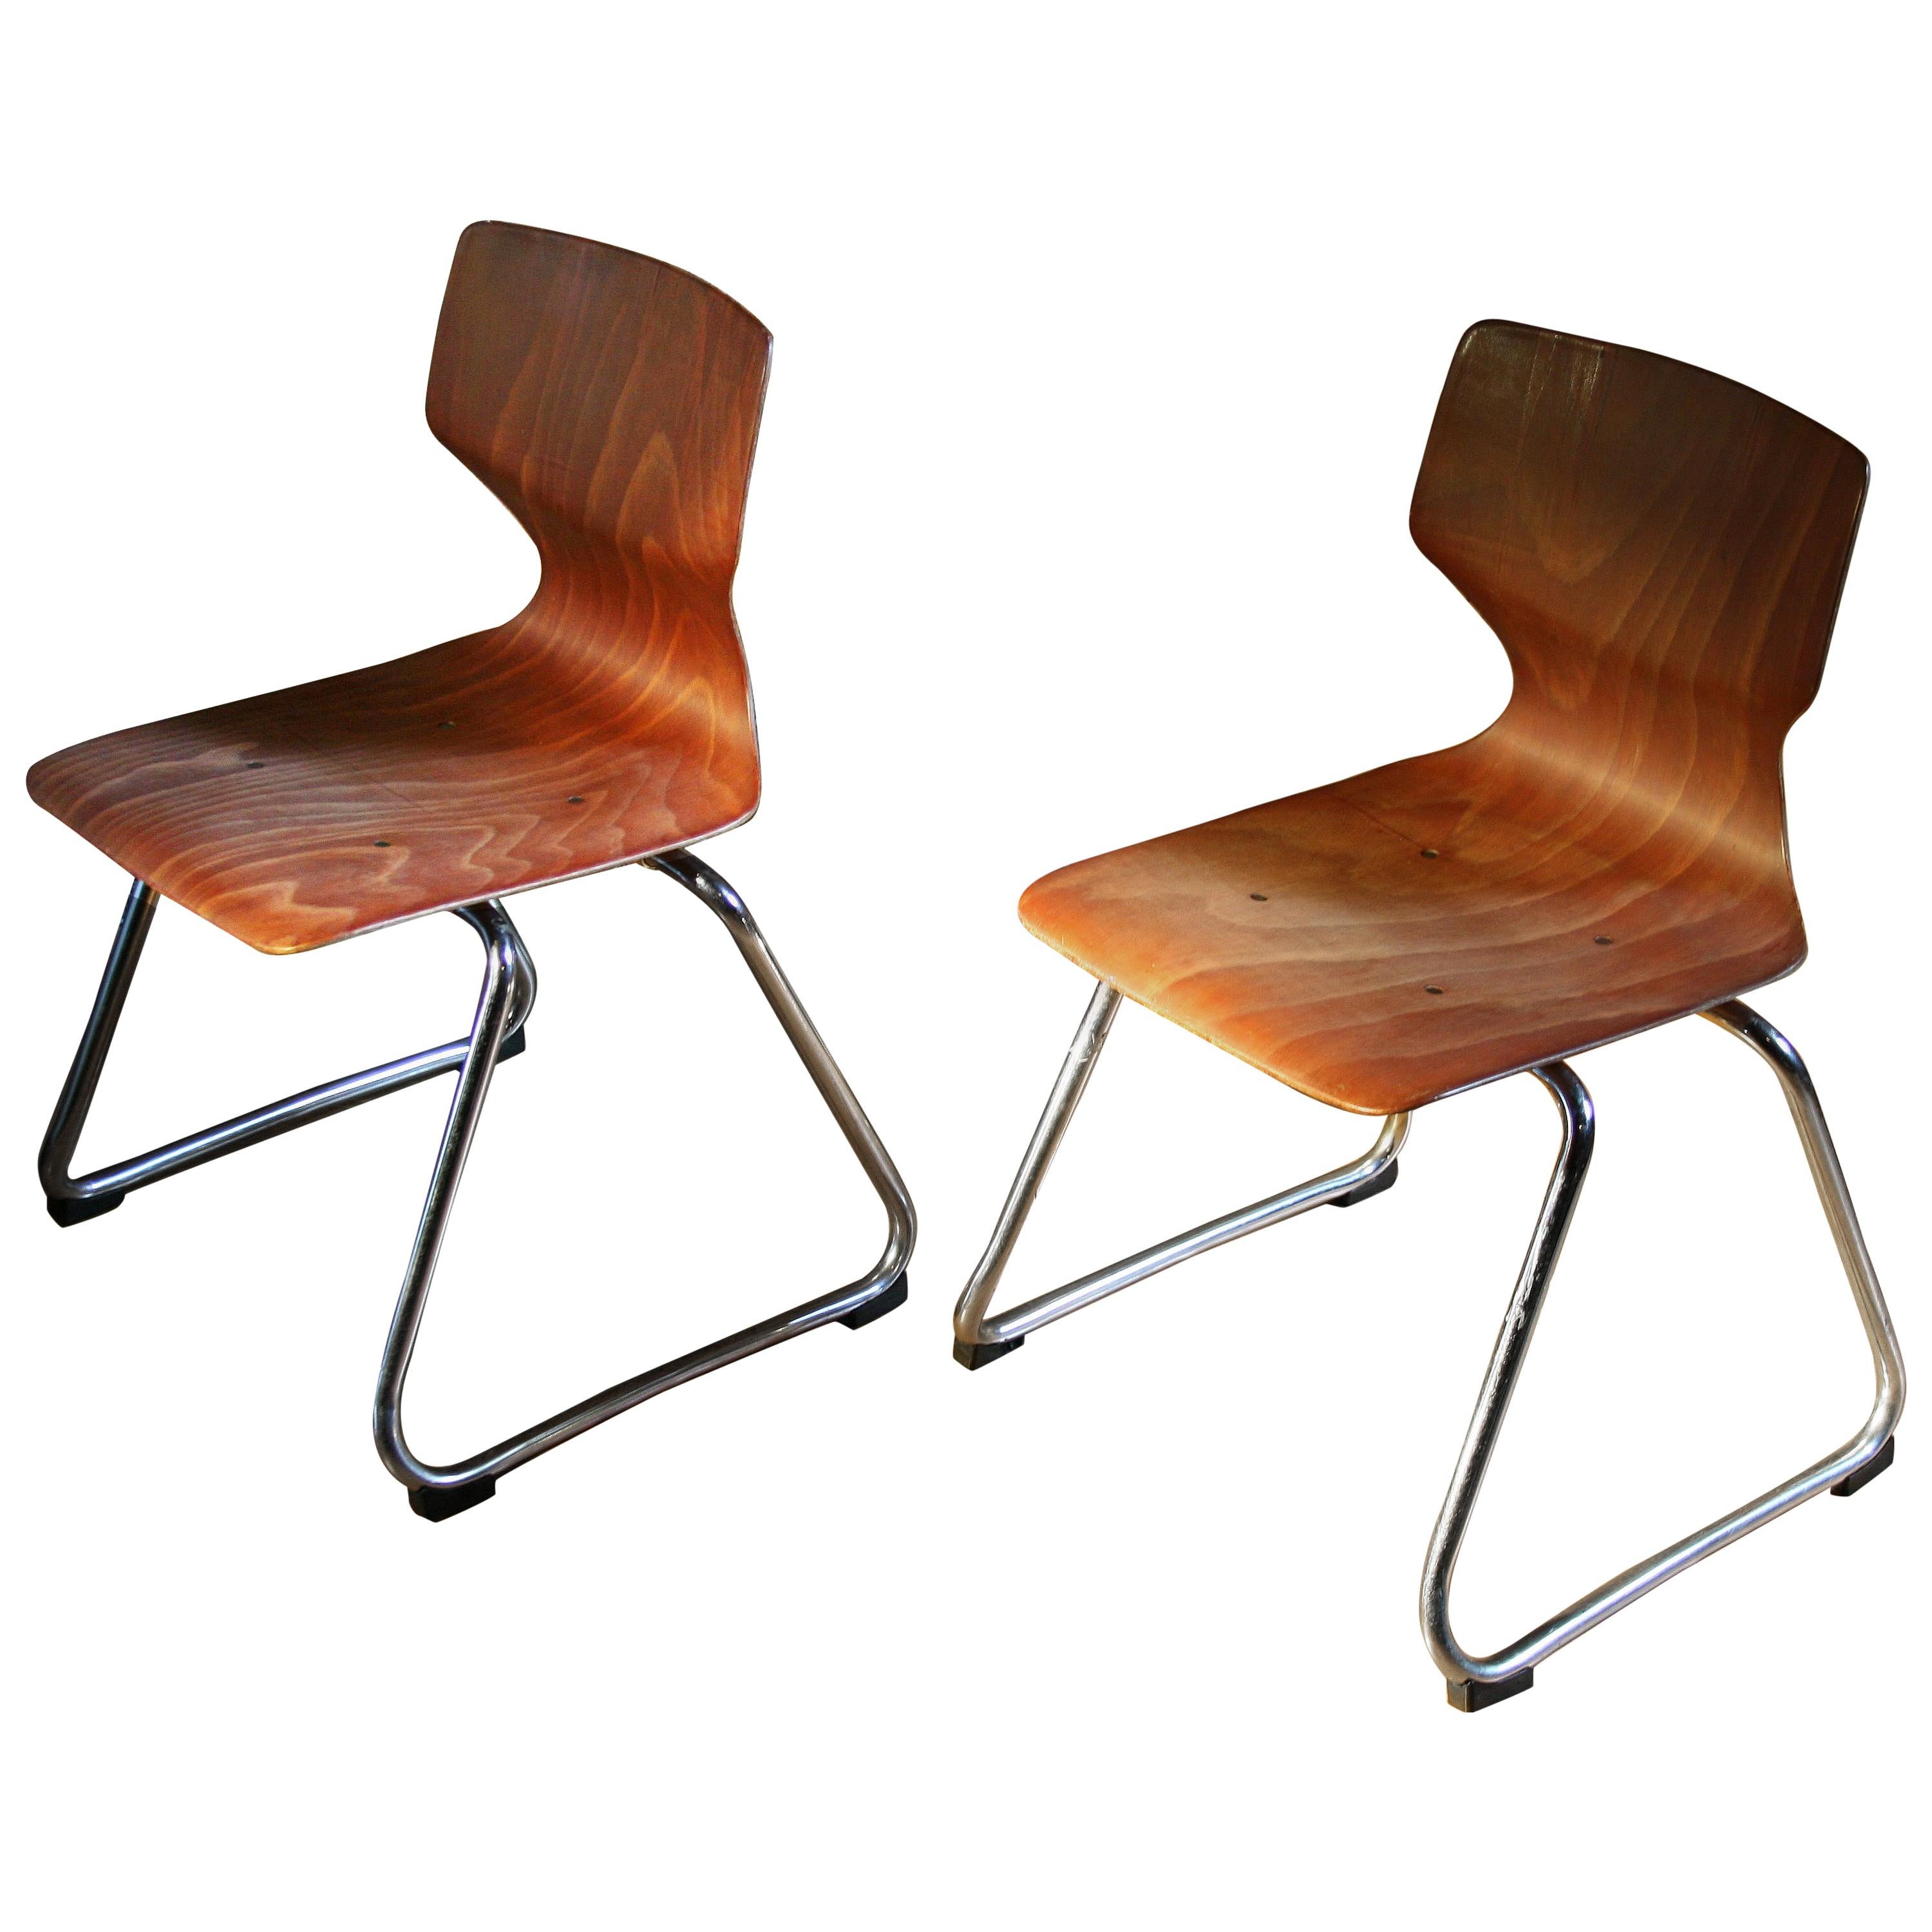 1960s Two Pieces of Adam Stegner’s Chairs Designed for Elmar Flototto